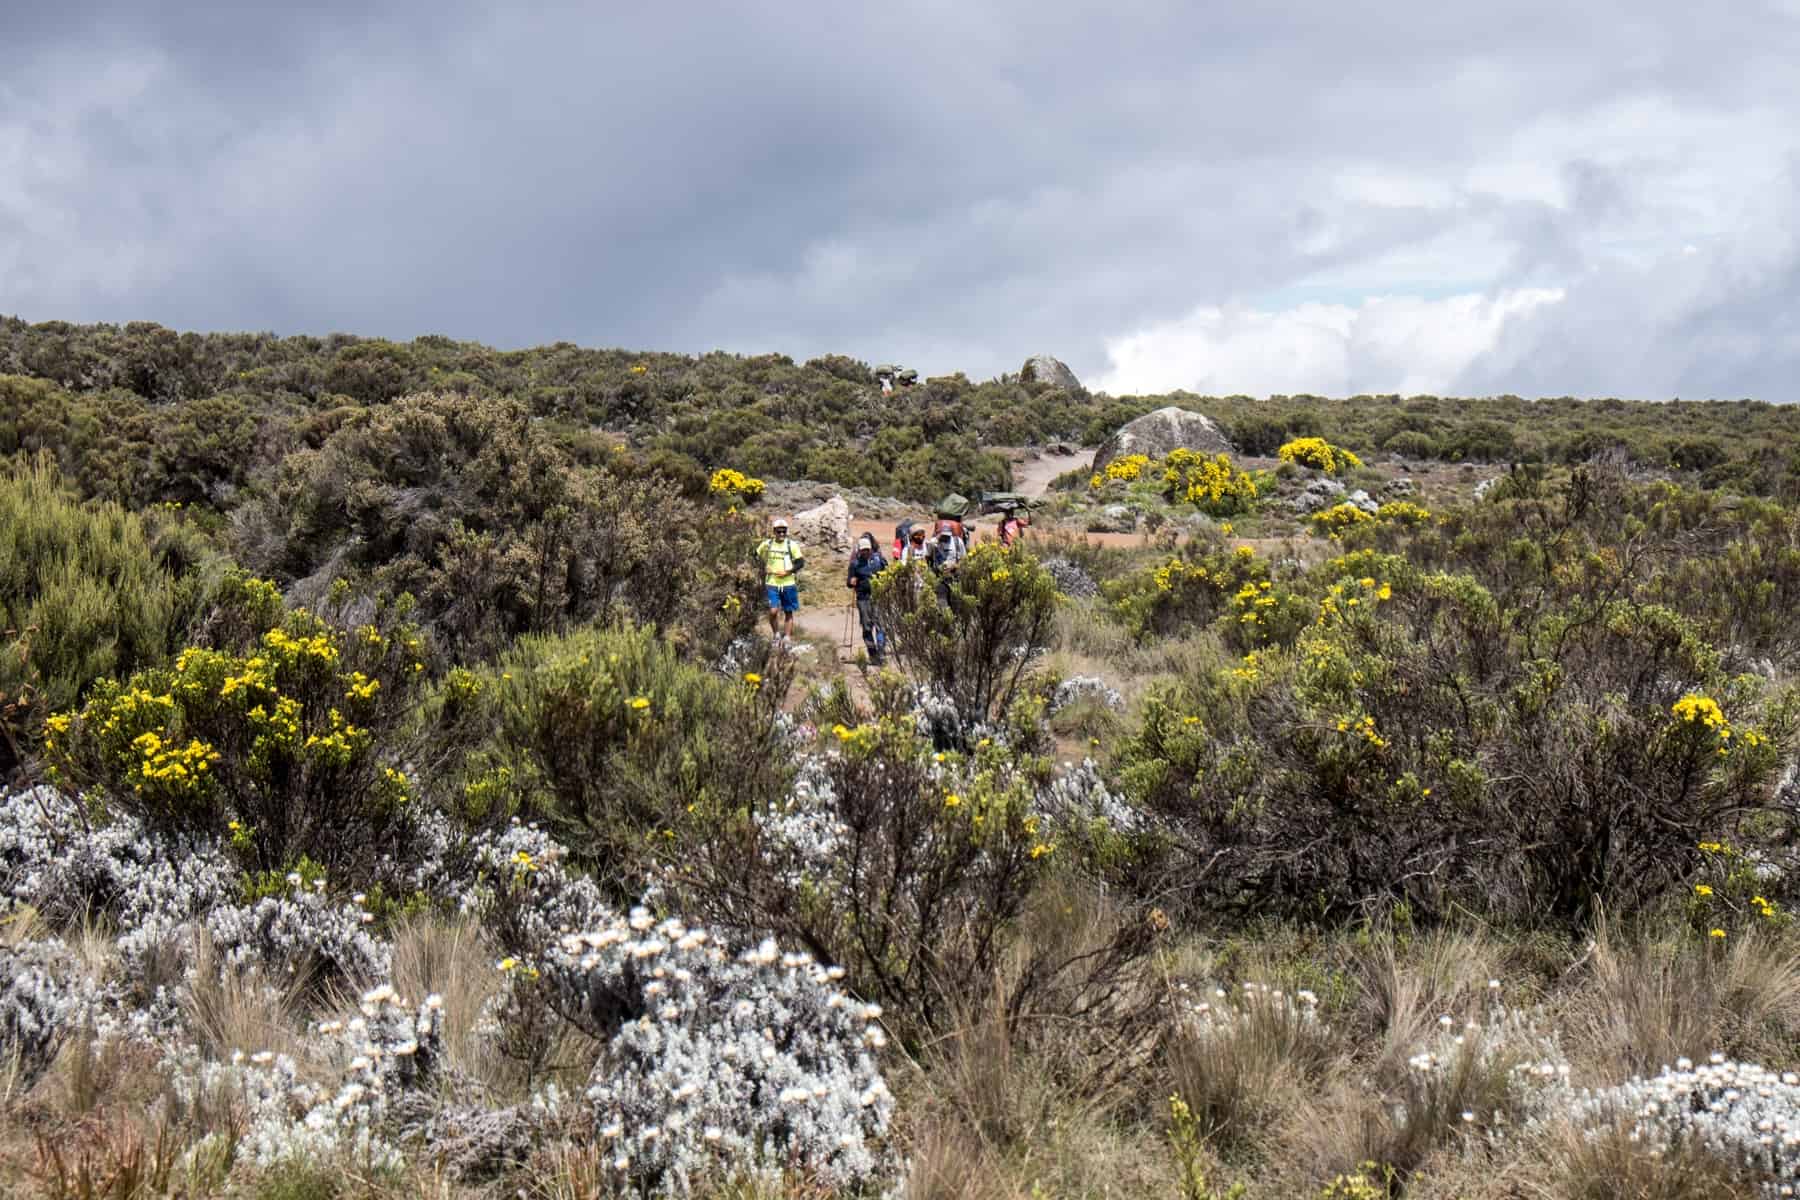 A small group of people trekking Kilimanjaro through a orange pathway through rocks, green bushes with yellow and wildflowers.